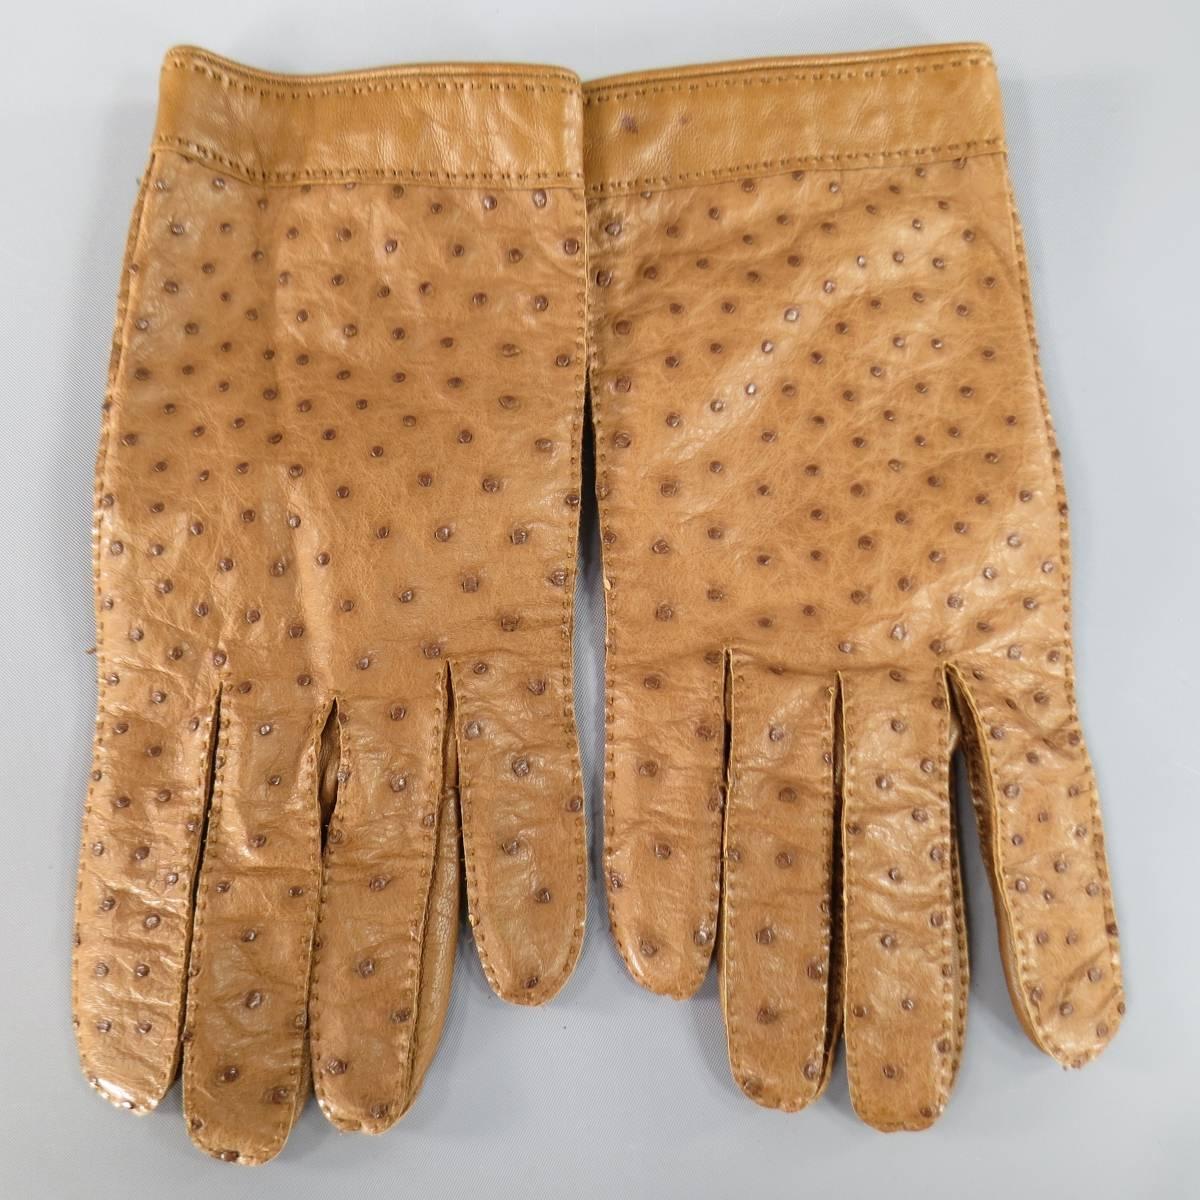 Vintage HERMES gloves in a rich caramel tan ostrich textured and smooth leather with top stitching throughout. Made in France.
 
Excellent Pre-Owned Condition..
Marked: 7 1/2
 
Measurements:
Length: 9 in.
Width: 4 in.
